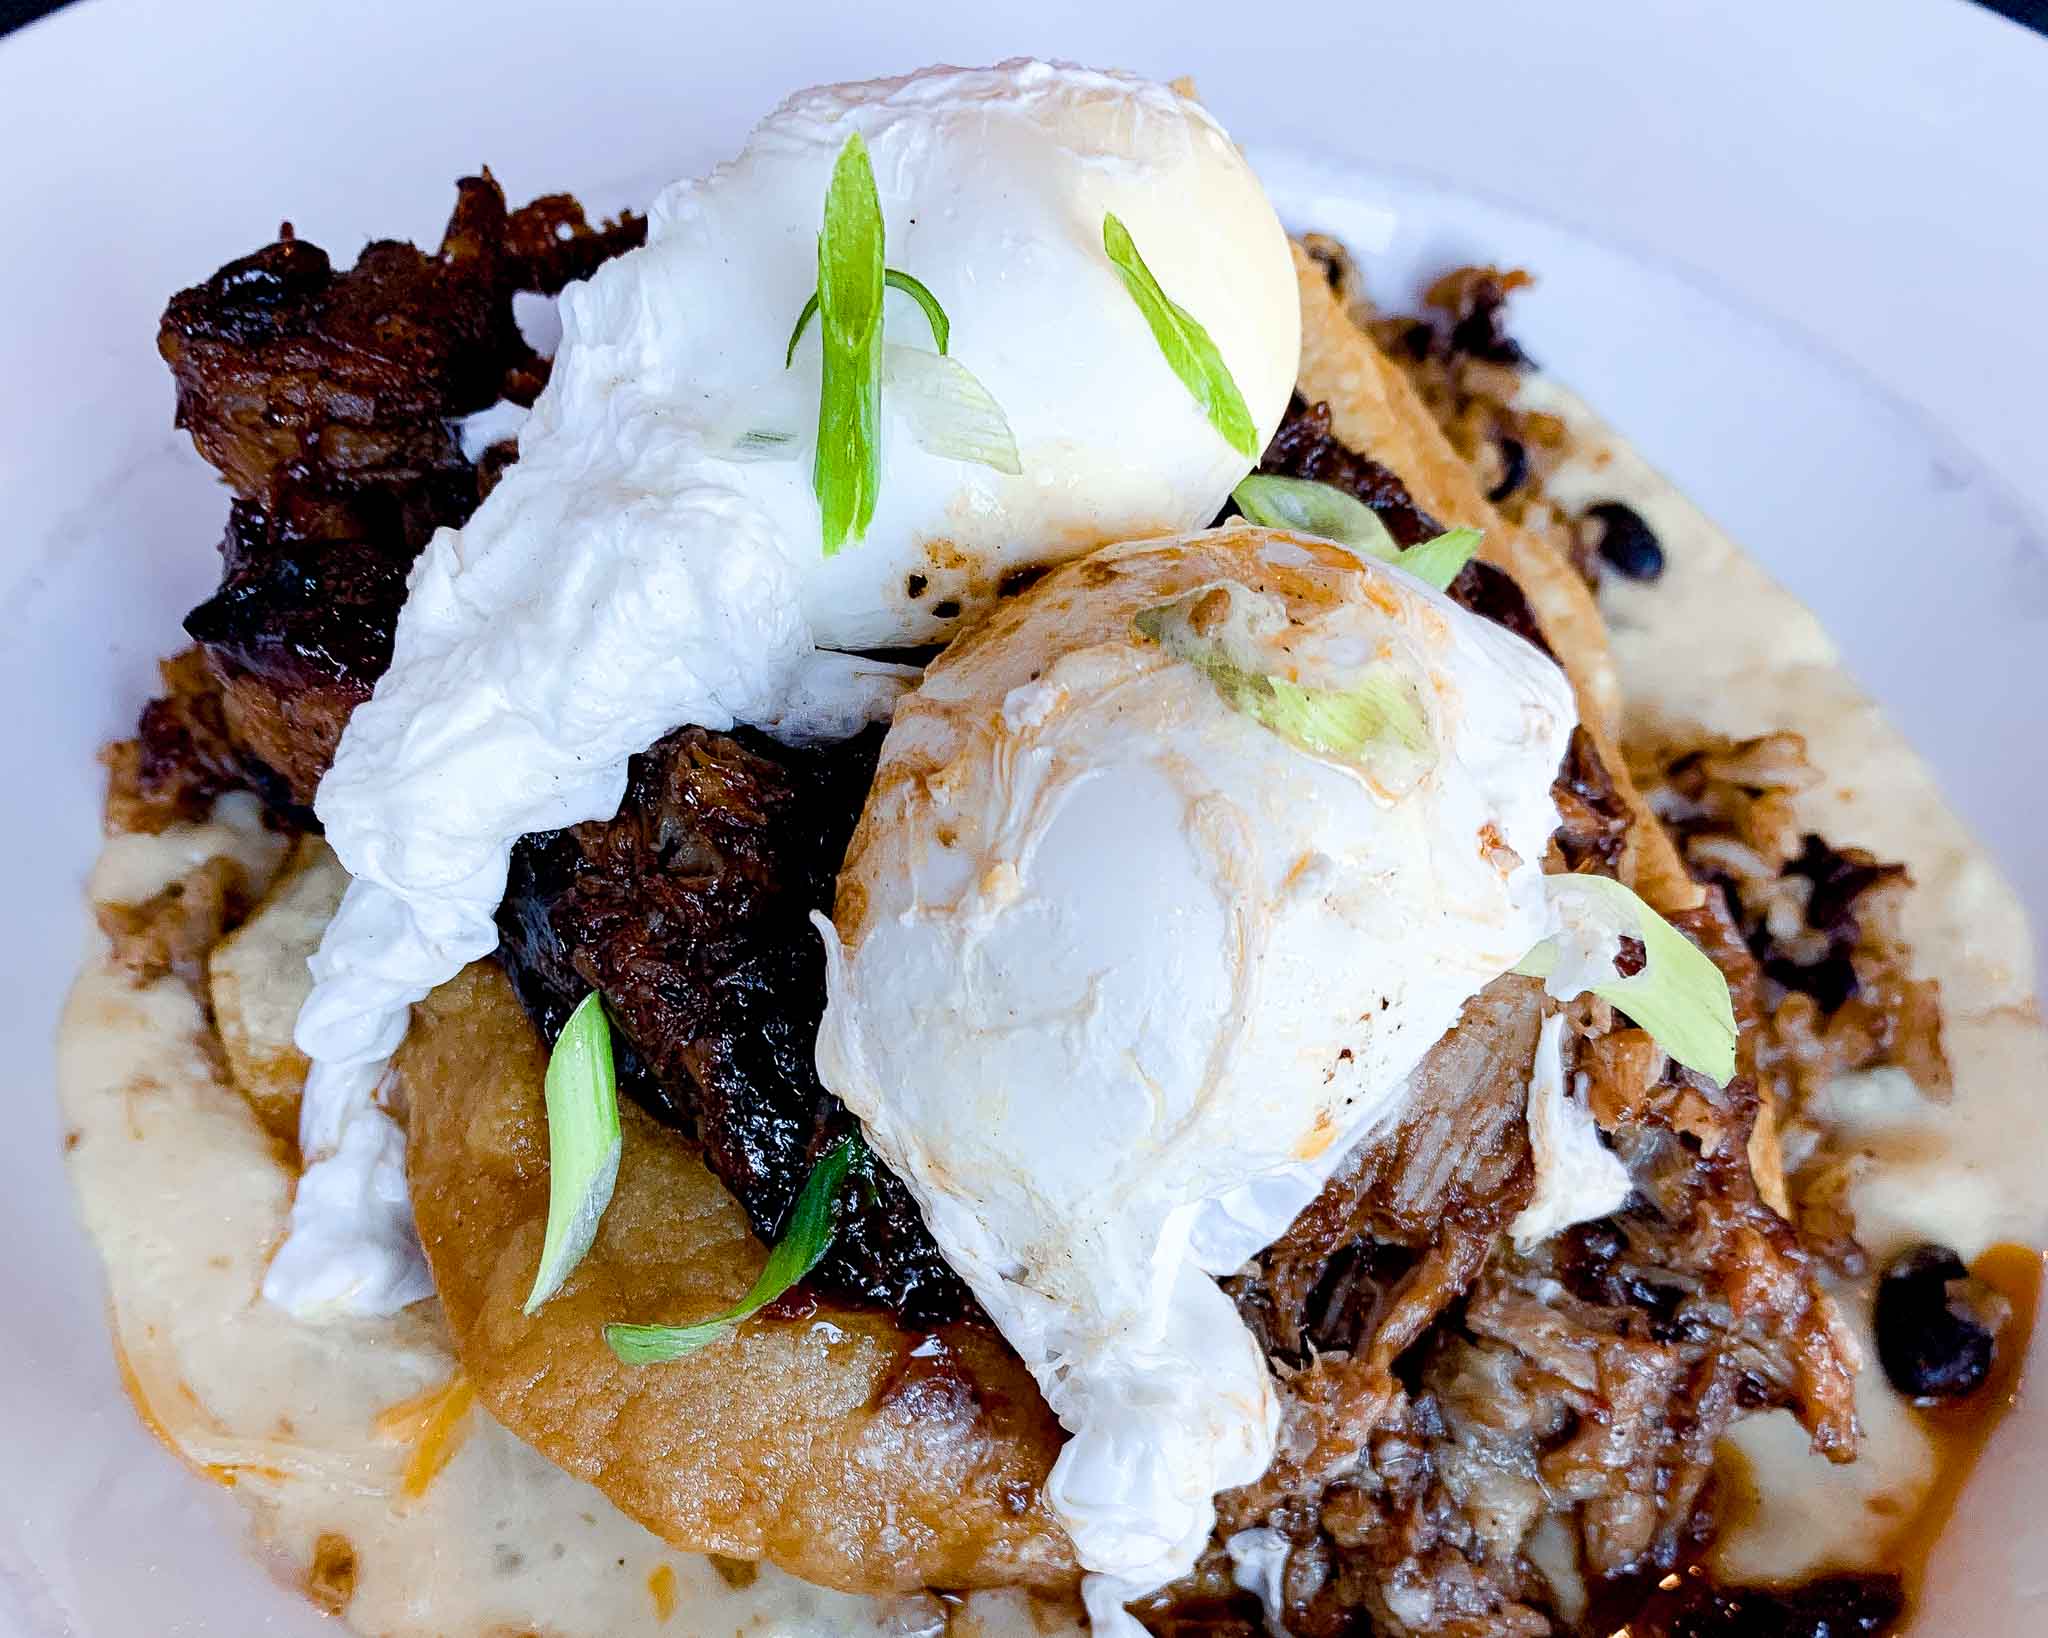 poached eggs sit on top of pulled pork with hollandaise sauce